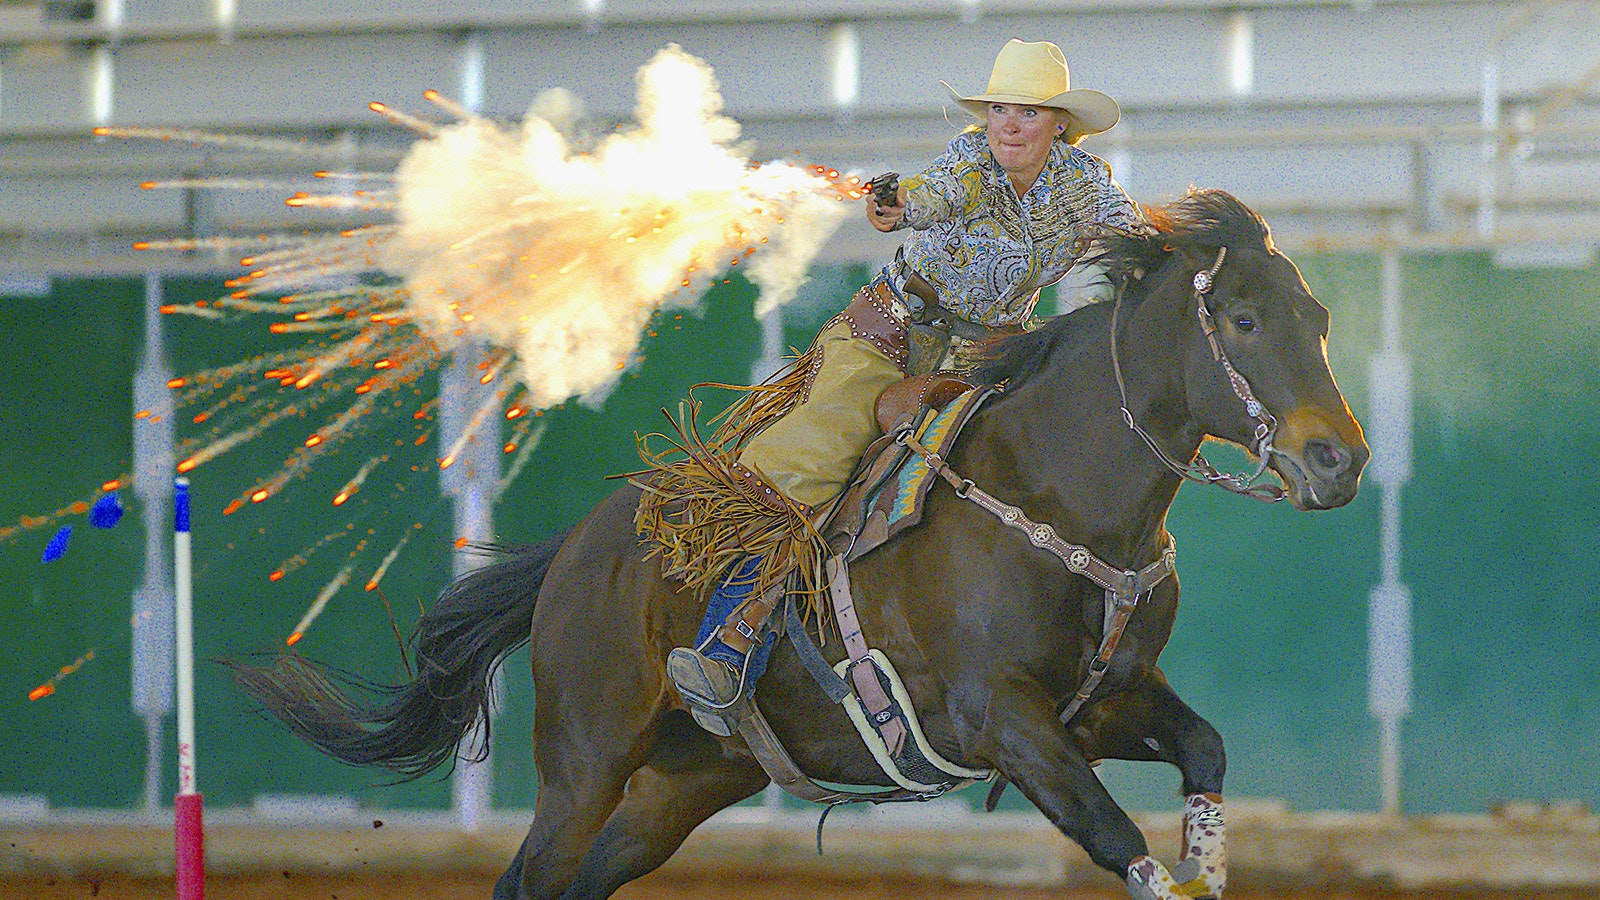 Sparks fly from the black powder explosion used by Kendra Lenseigne during cowboy mounted shooting competition.